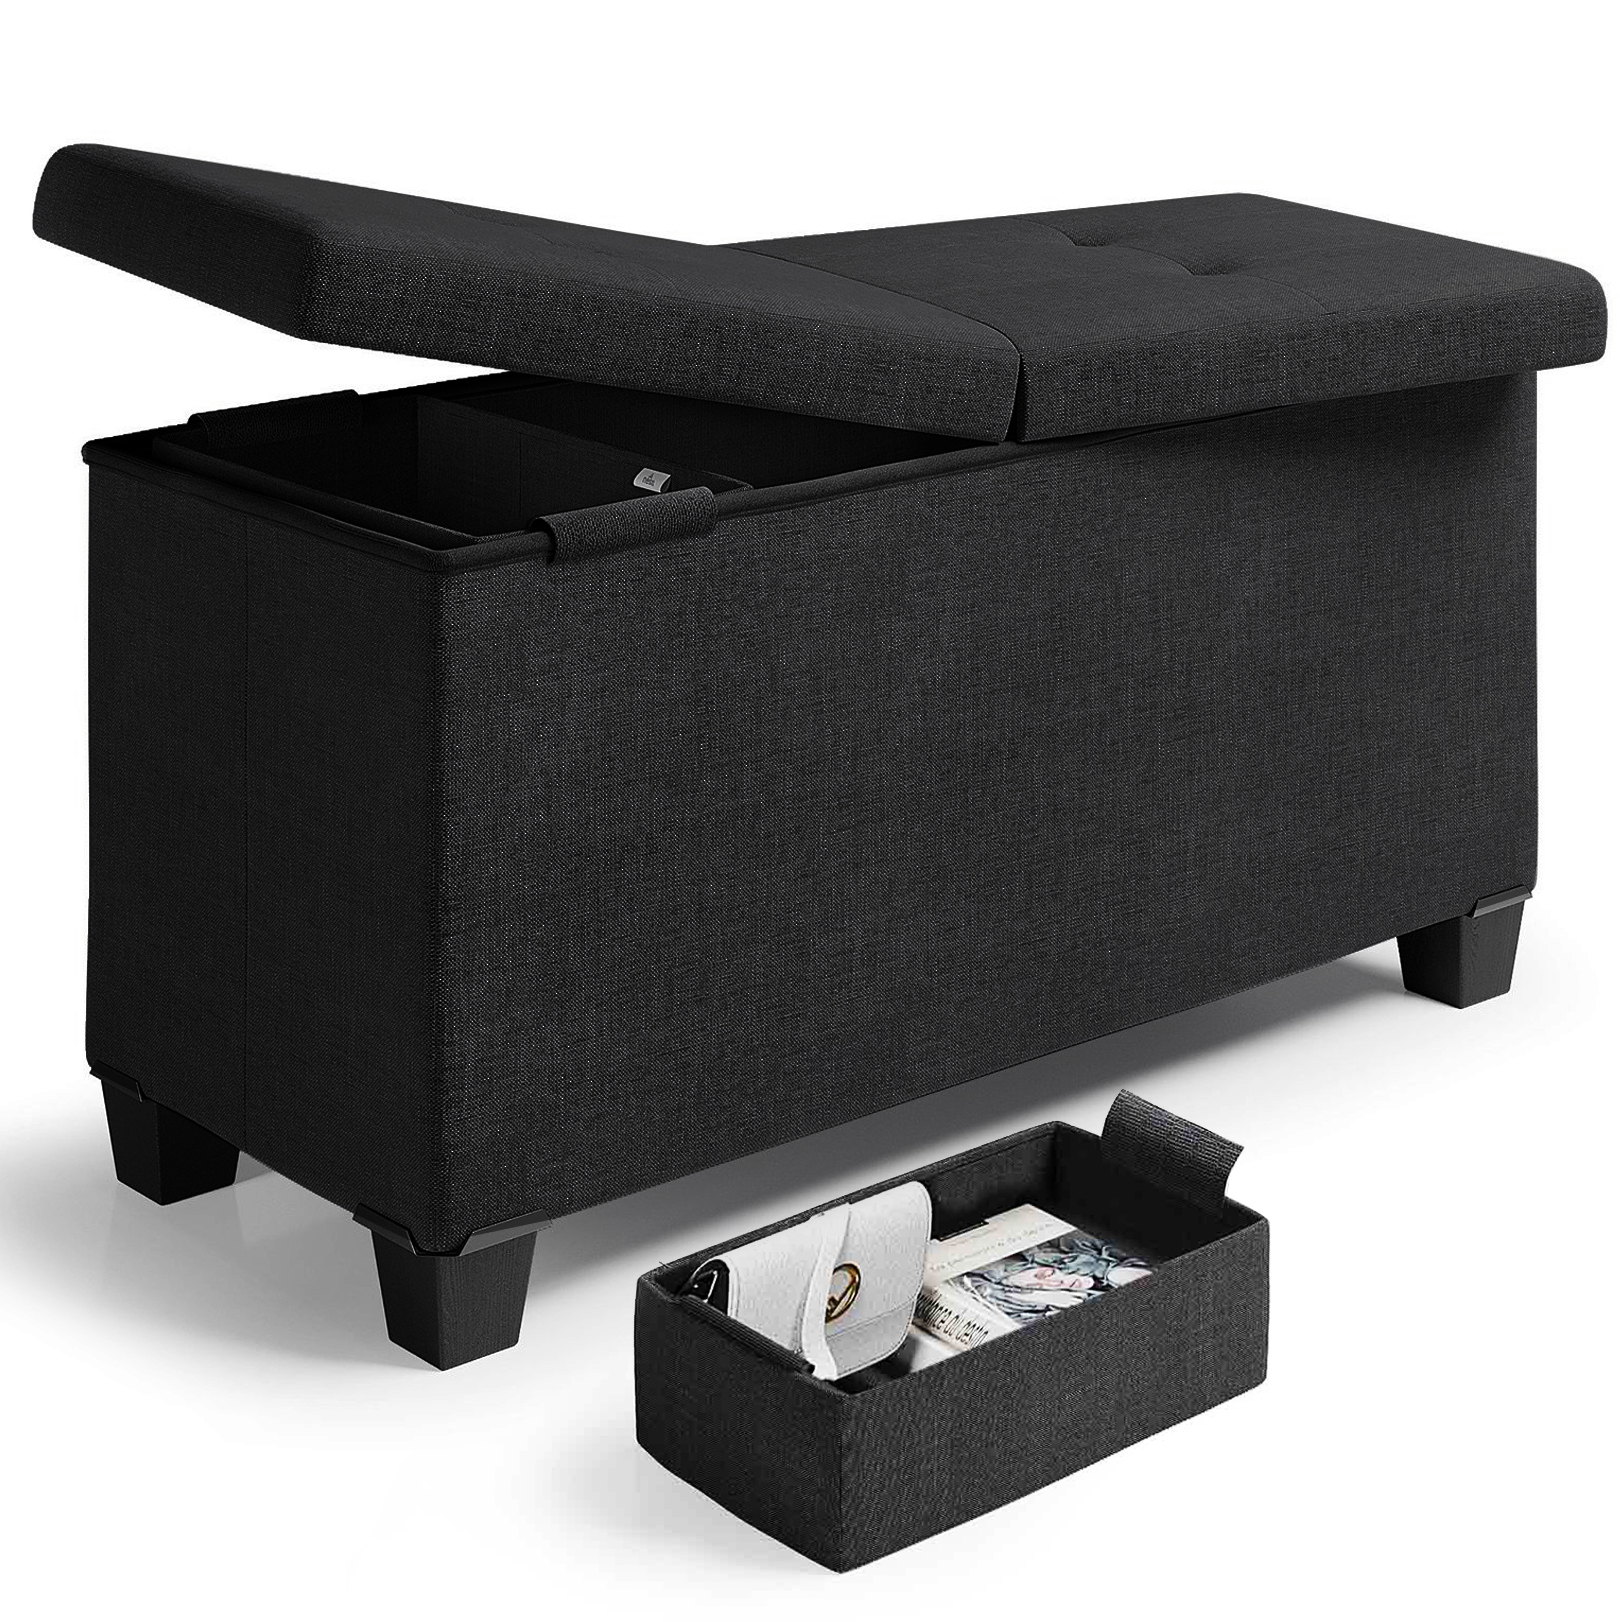 Hearth and Harbor Storage Ottoman Bench, Linen 30" Ottoman With Storage, Black - image 1 of 8